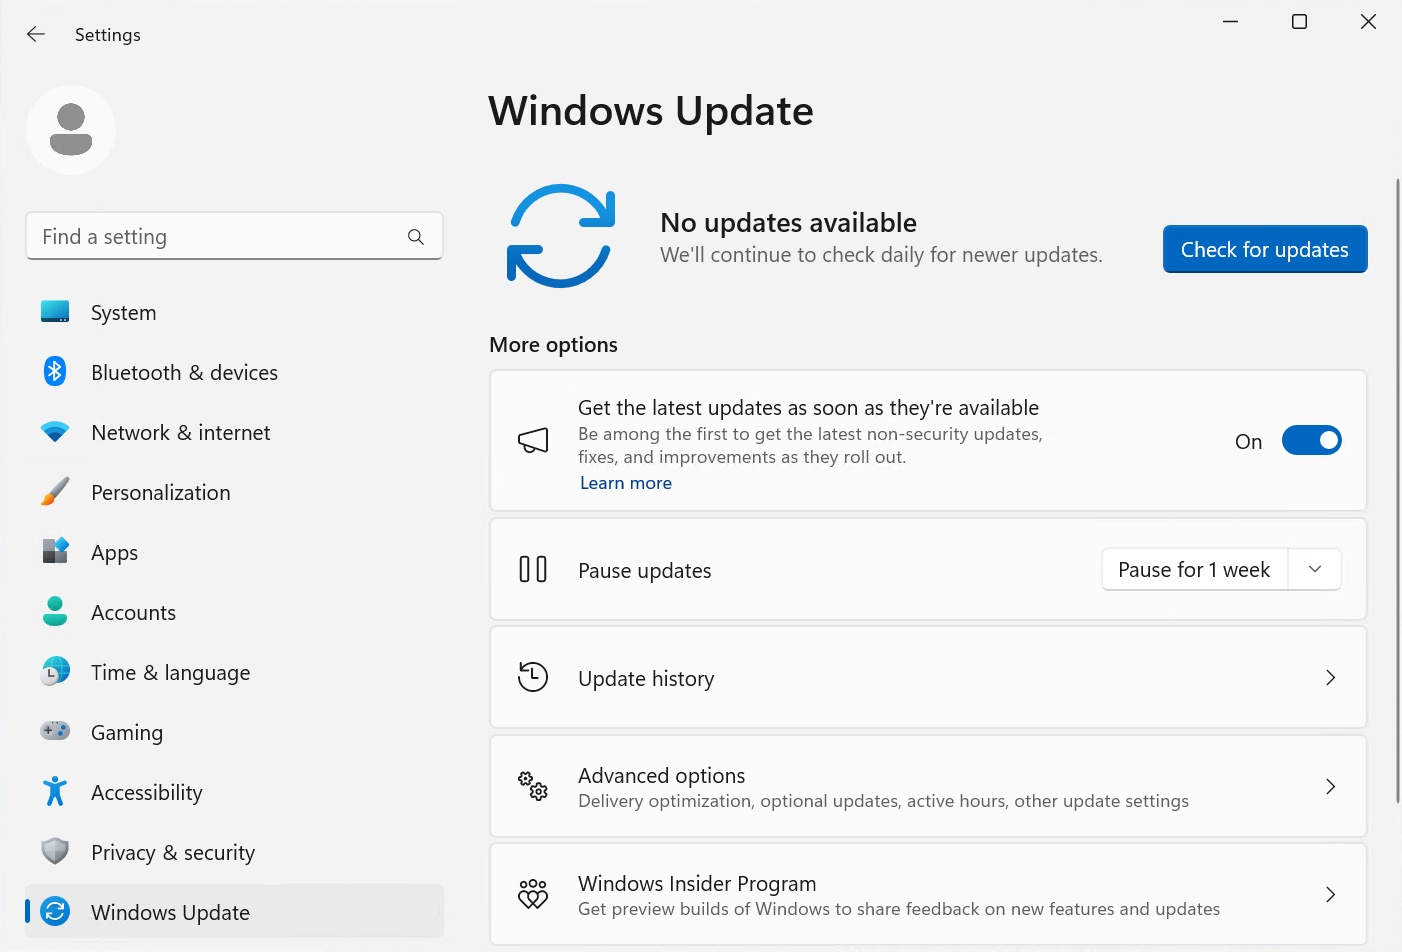 Open the Windows Update settings
Check for any pending updates and install them